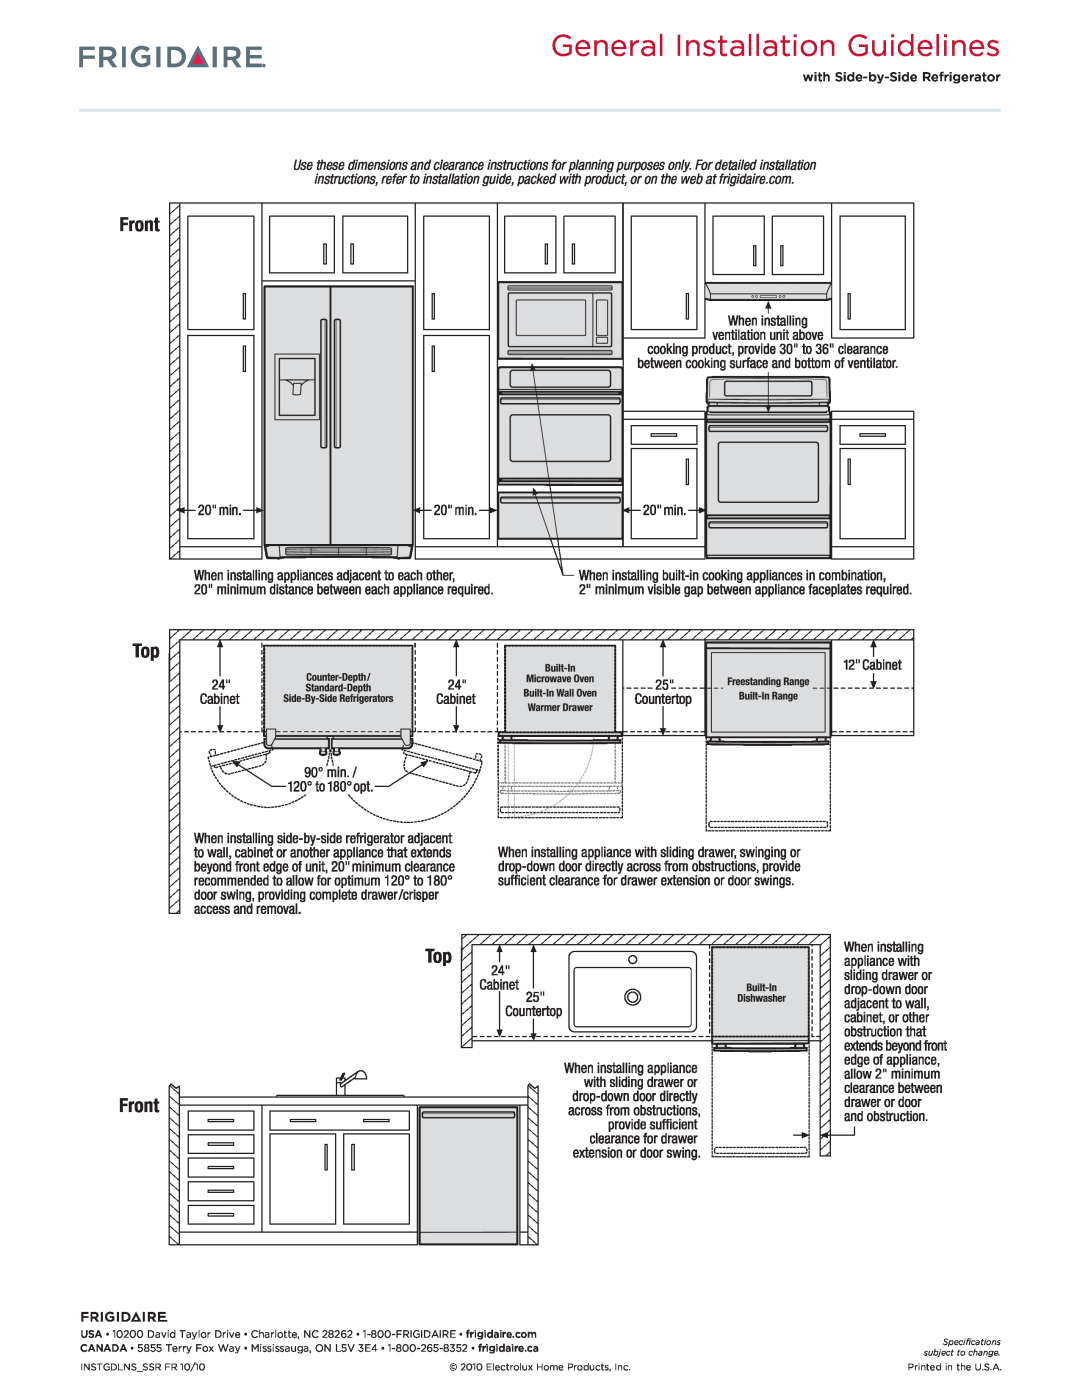 Frigidaire FGET3045K F/W/B dimensions General Installation Guidelines, Top Front 